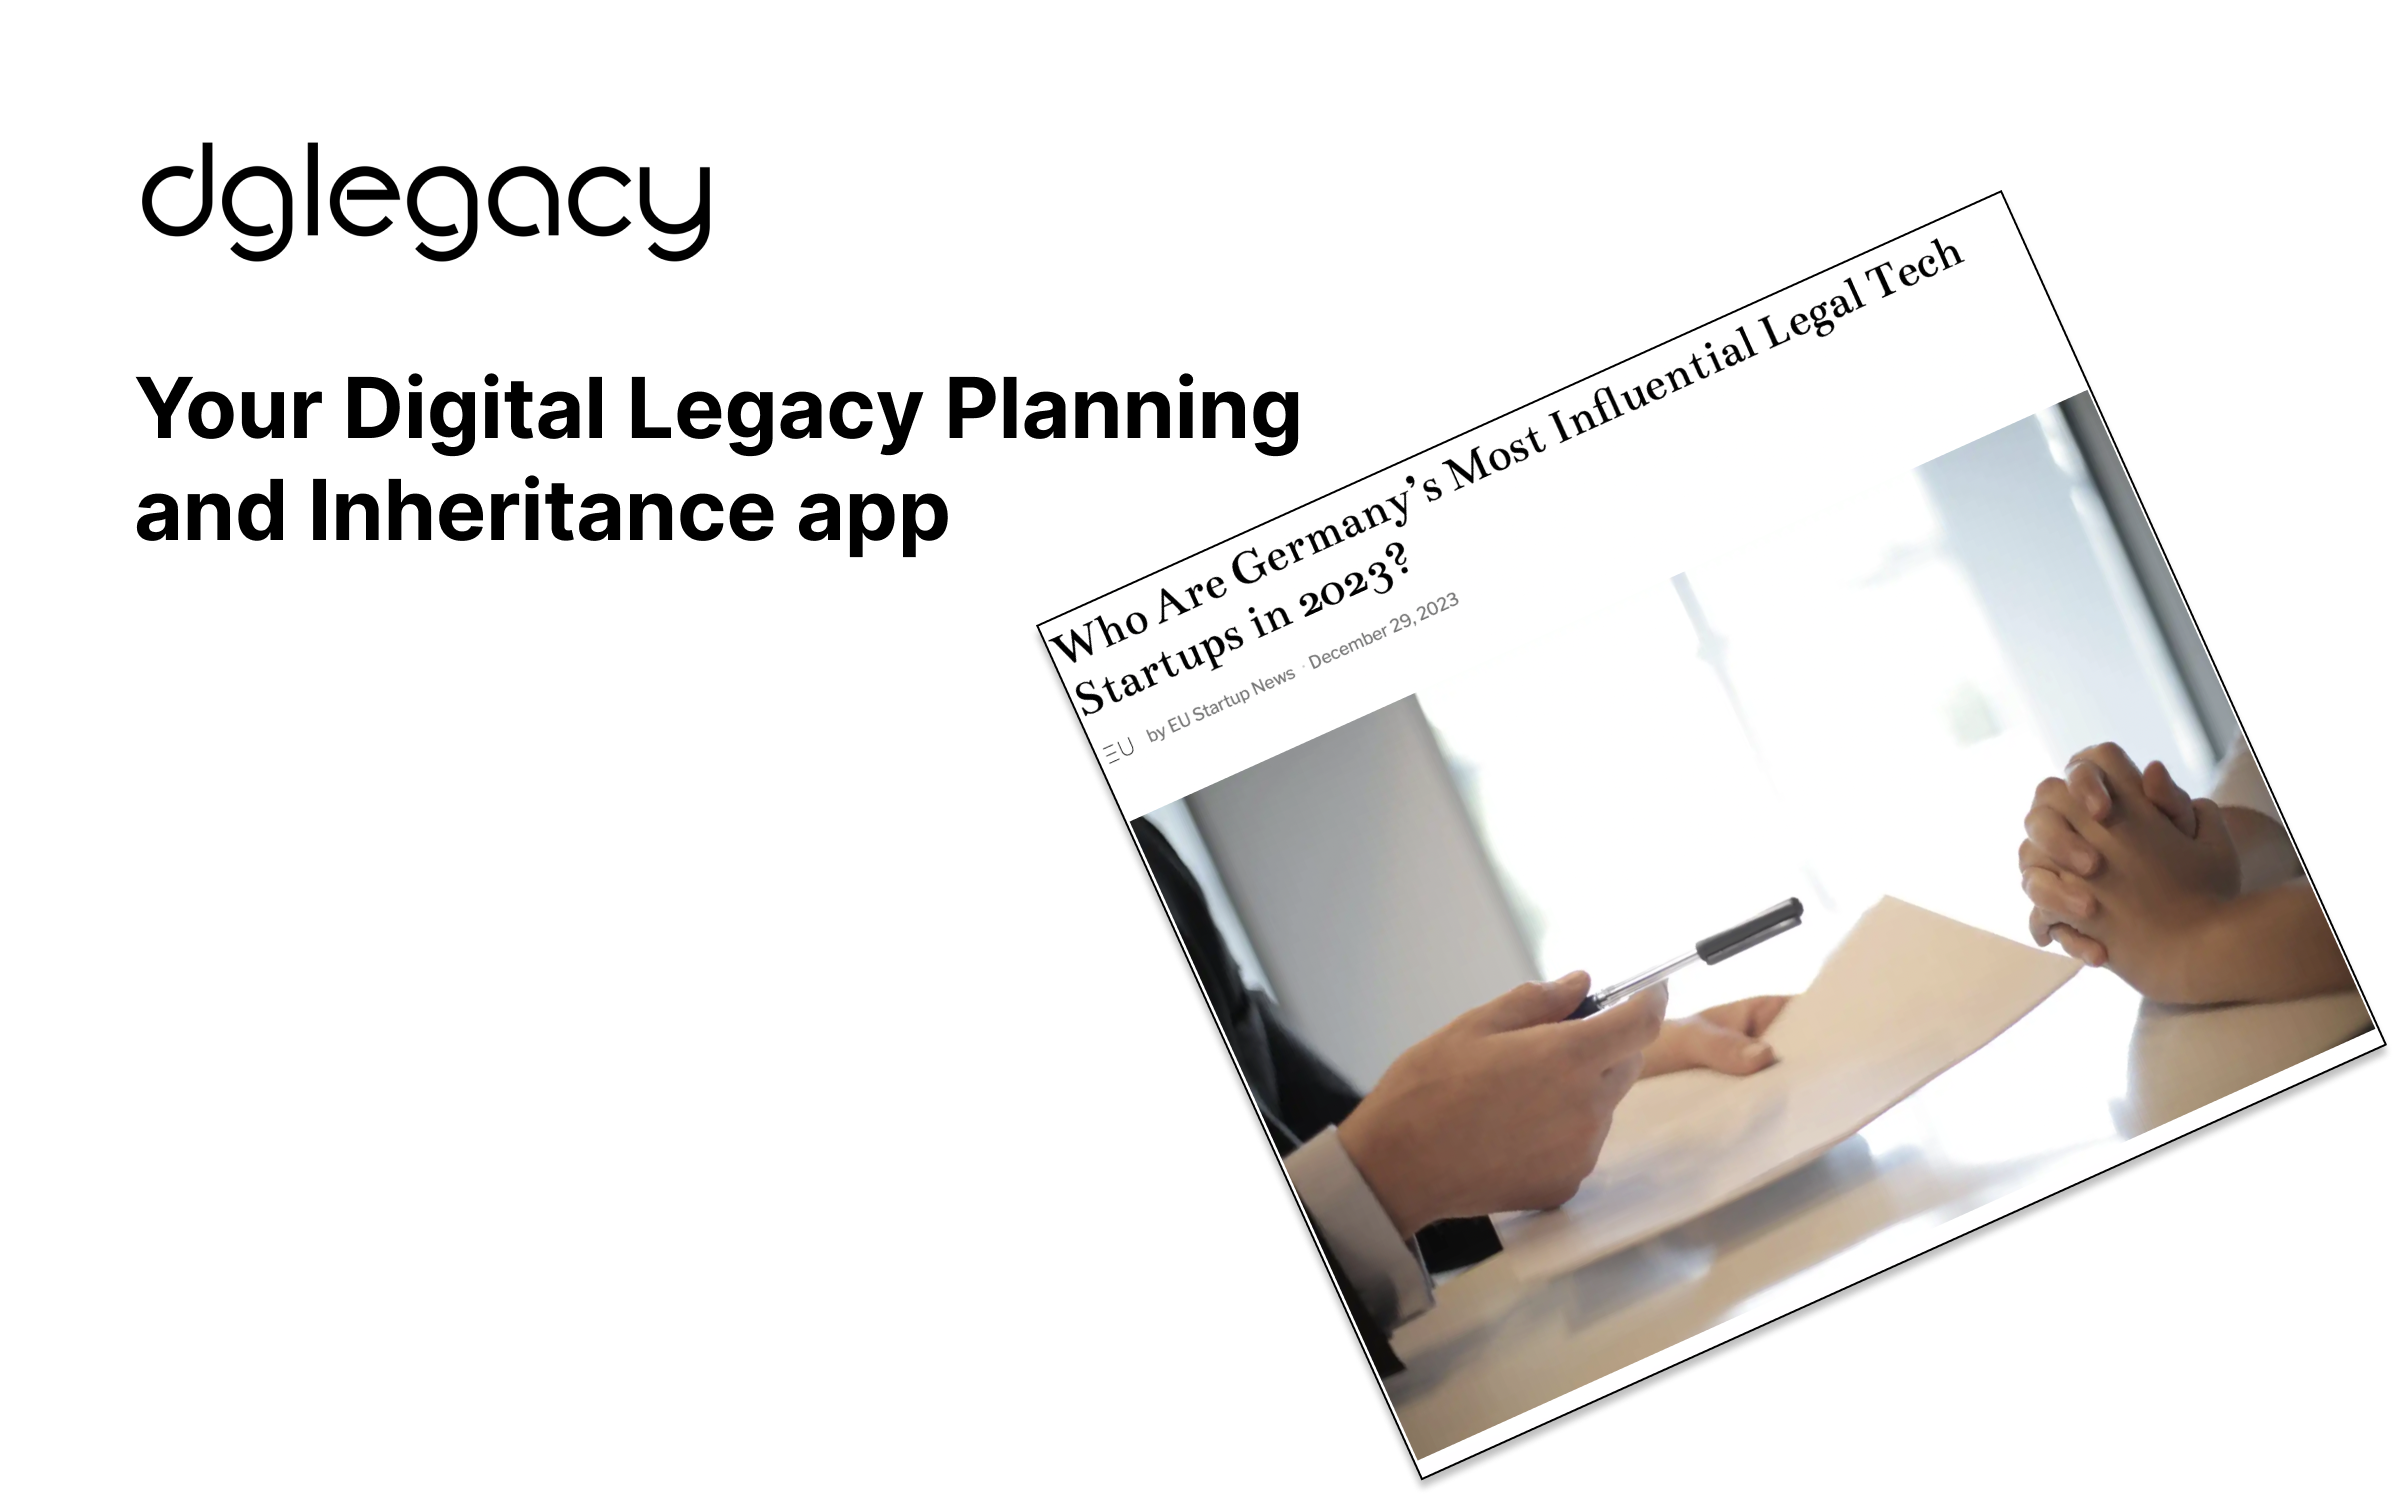 DGLegacy, your digital legacy planning and inheritance service, named One of the Most Influential Legal Tech Startup.